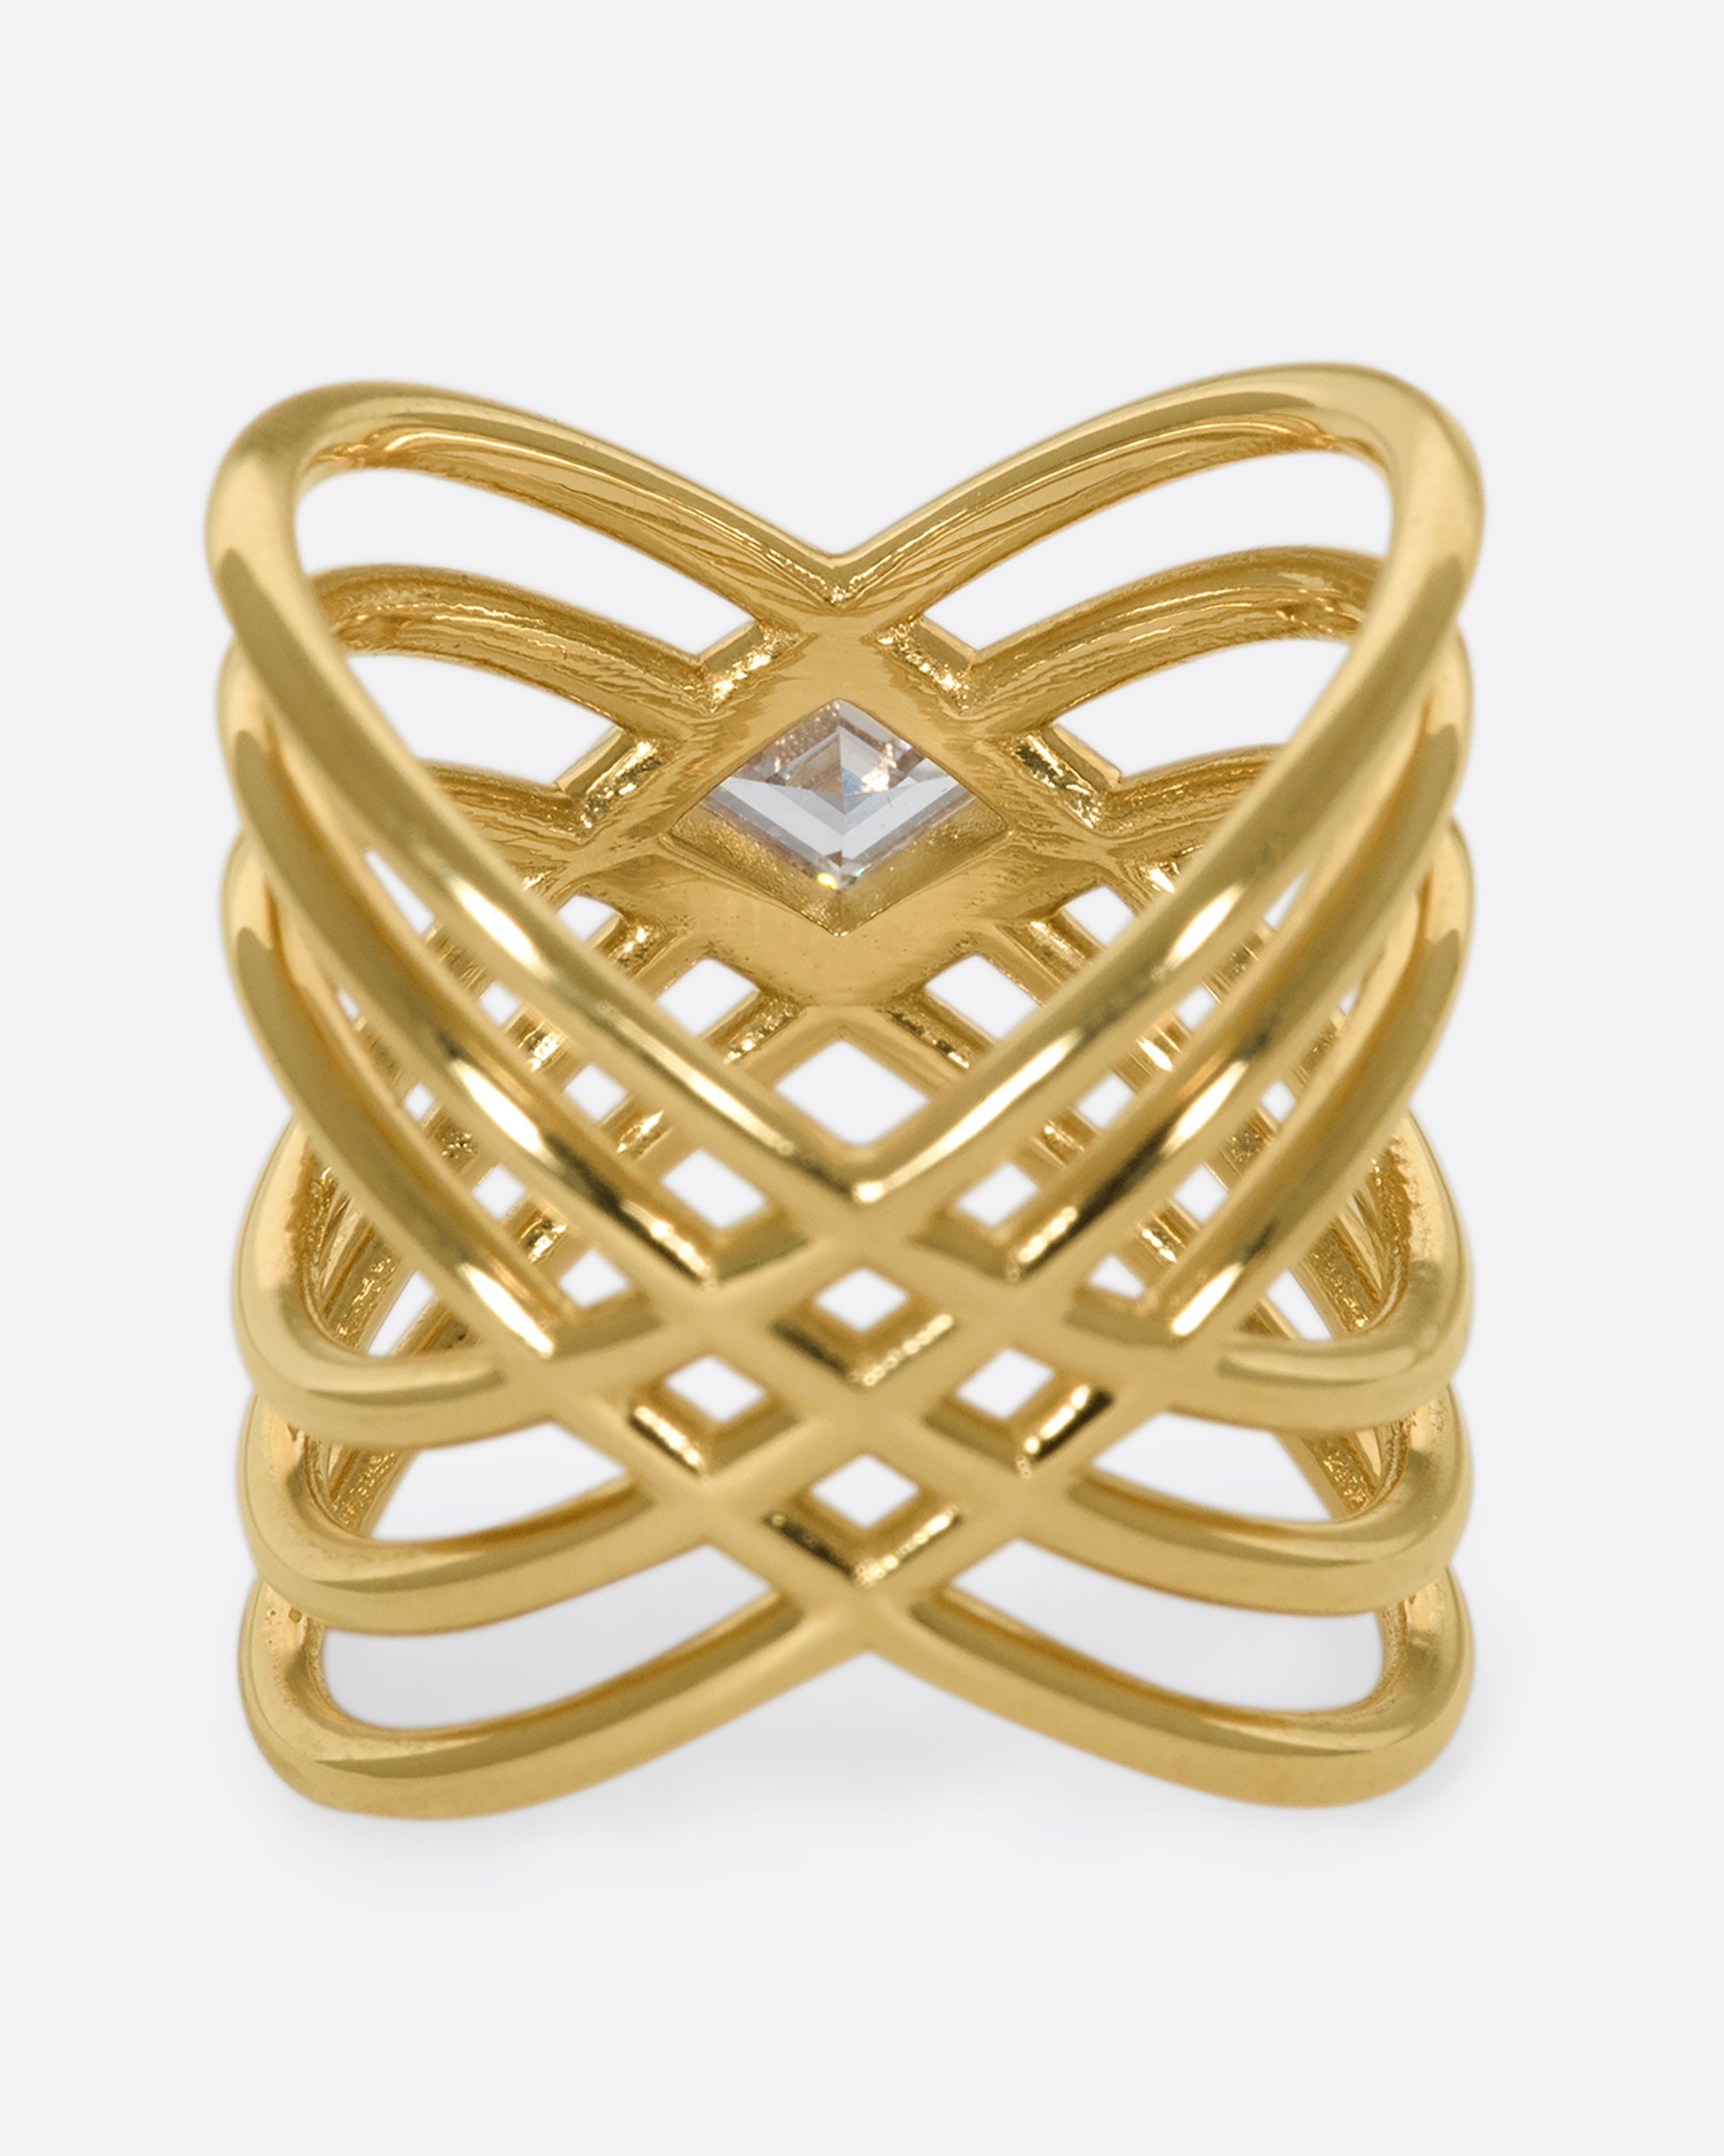 A vie of the underside of a multi banded X shaped ring with a lozenge shaped diamond in the center.